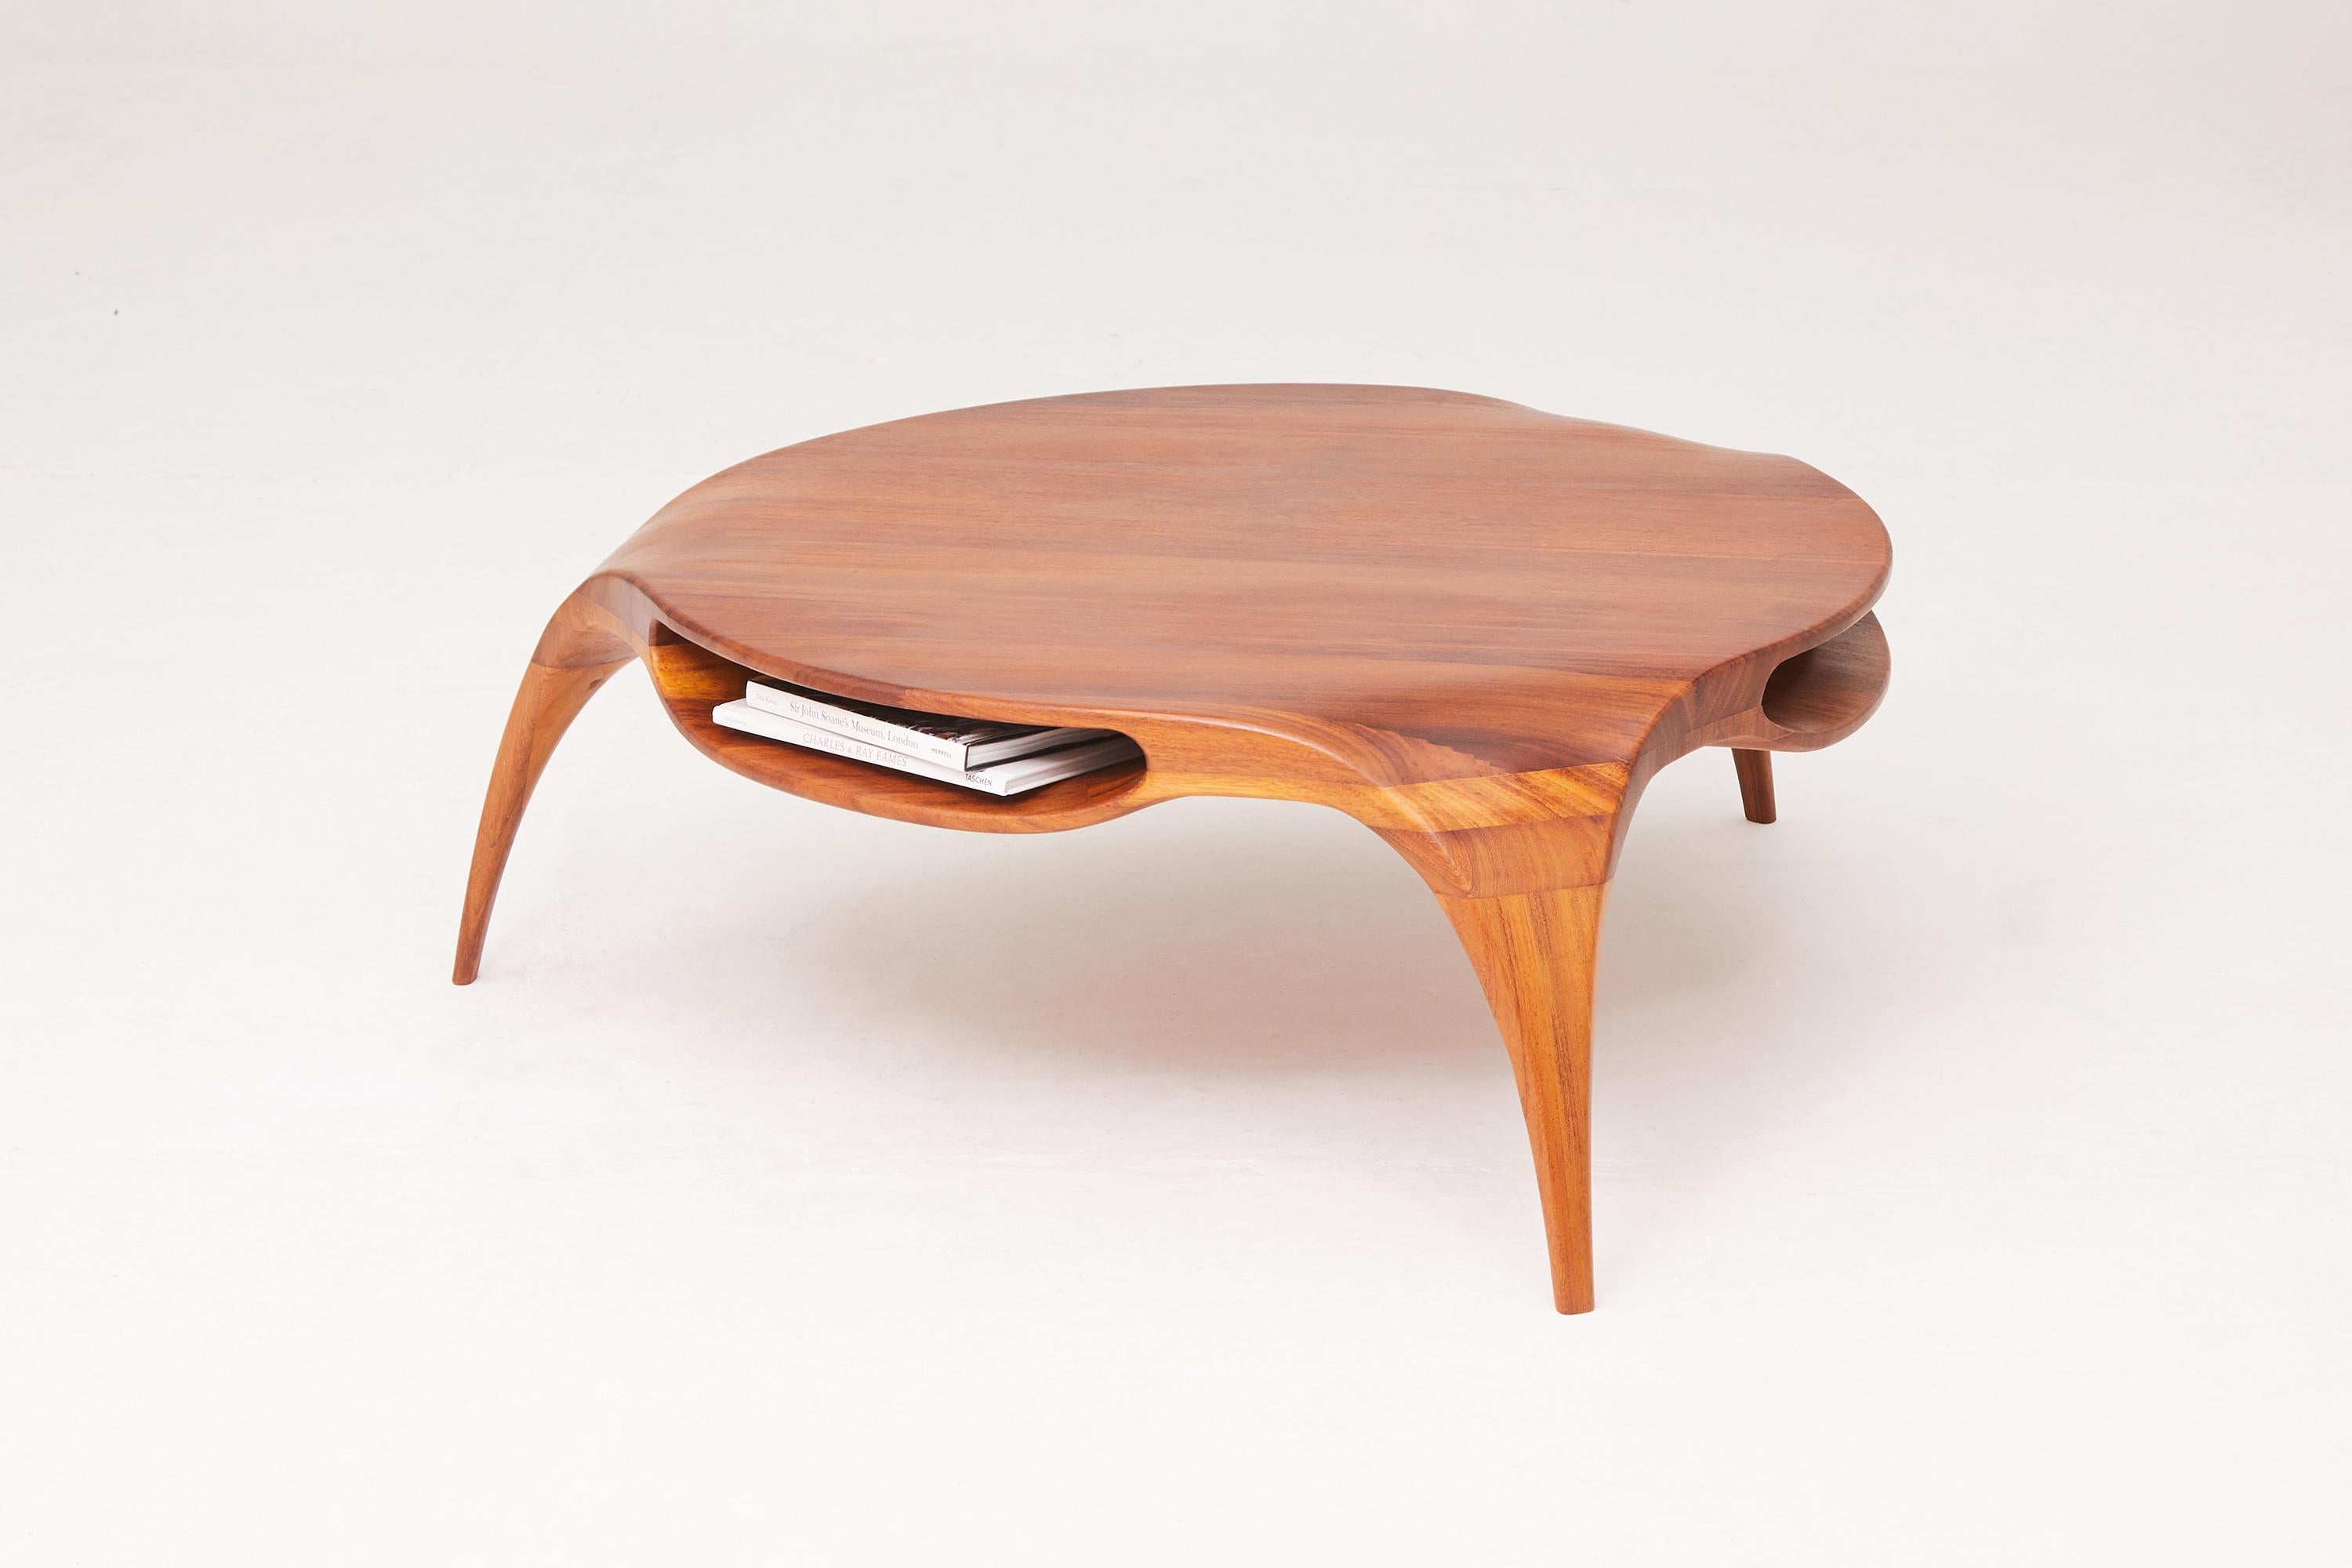 Iroko Wood Sankao coffee table by Henka Lab
Limited Edition
Dimensions: H 42 x W 120 x L 120 cm
Materials: Solid Iroko wood, oil, natural wax finish
Avalaible in Ash wood, charcoal color.
Series limited to 250 signed and numbered copies. Each